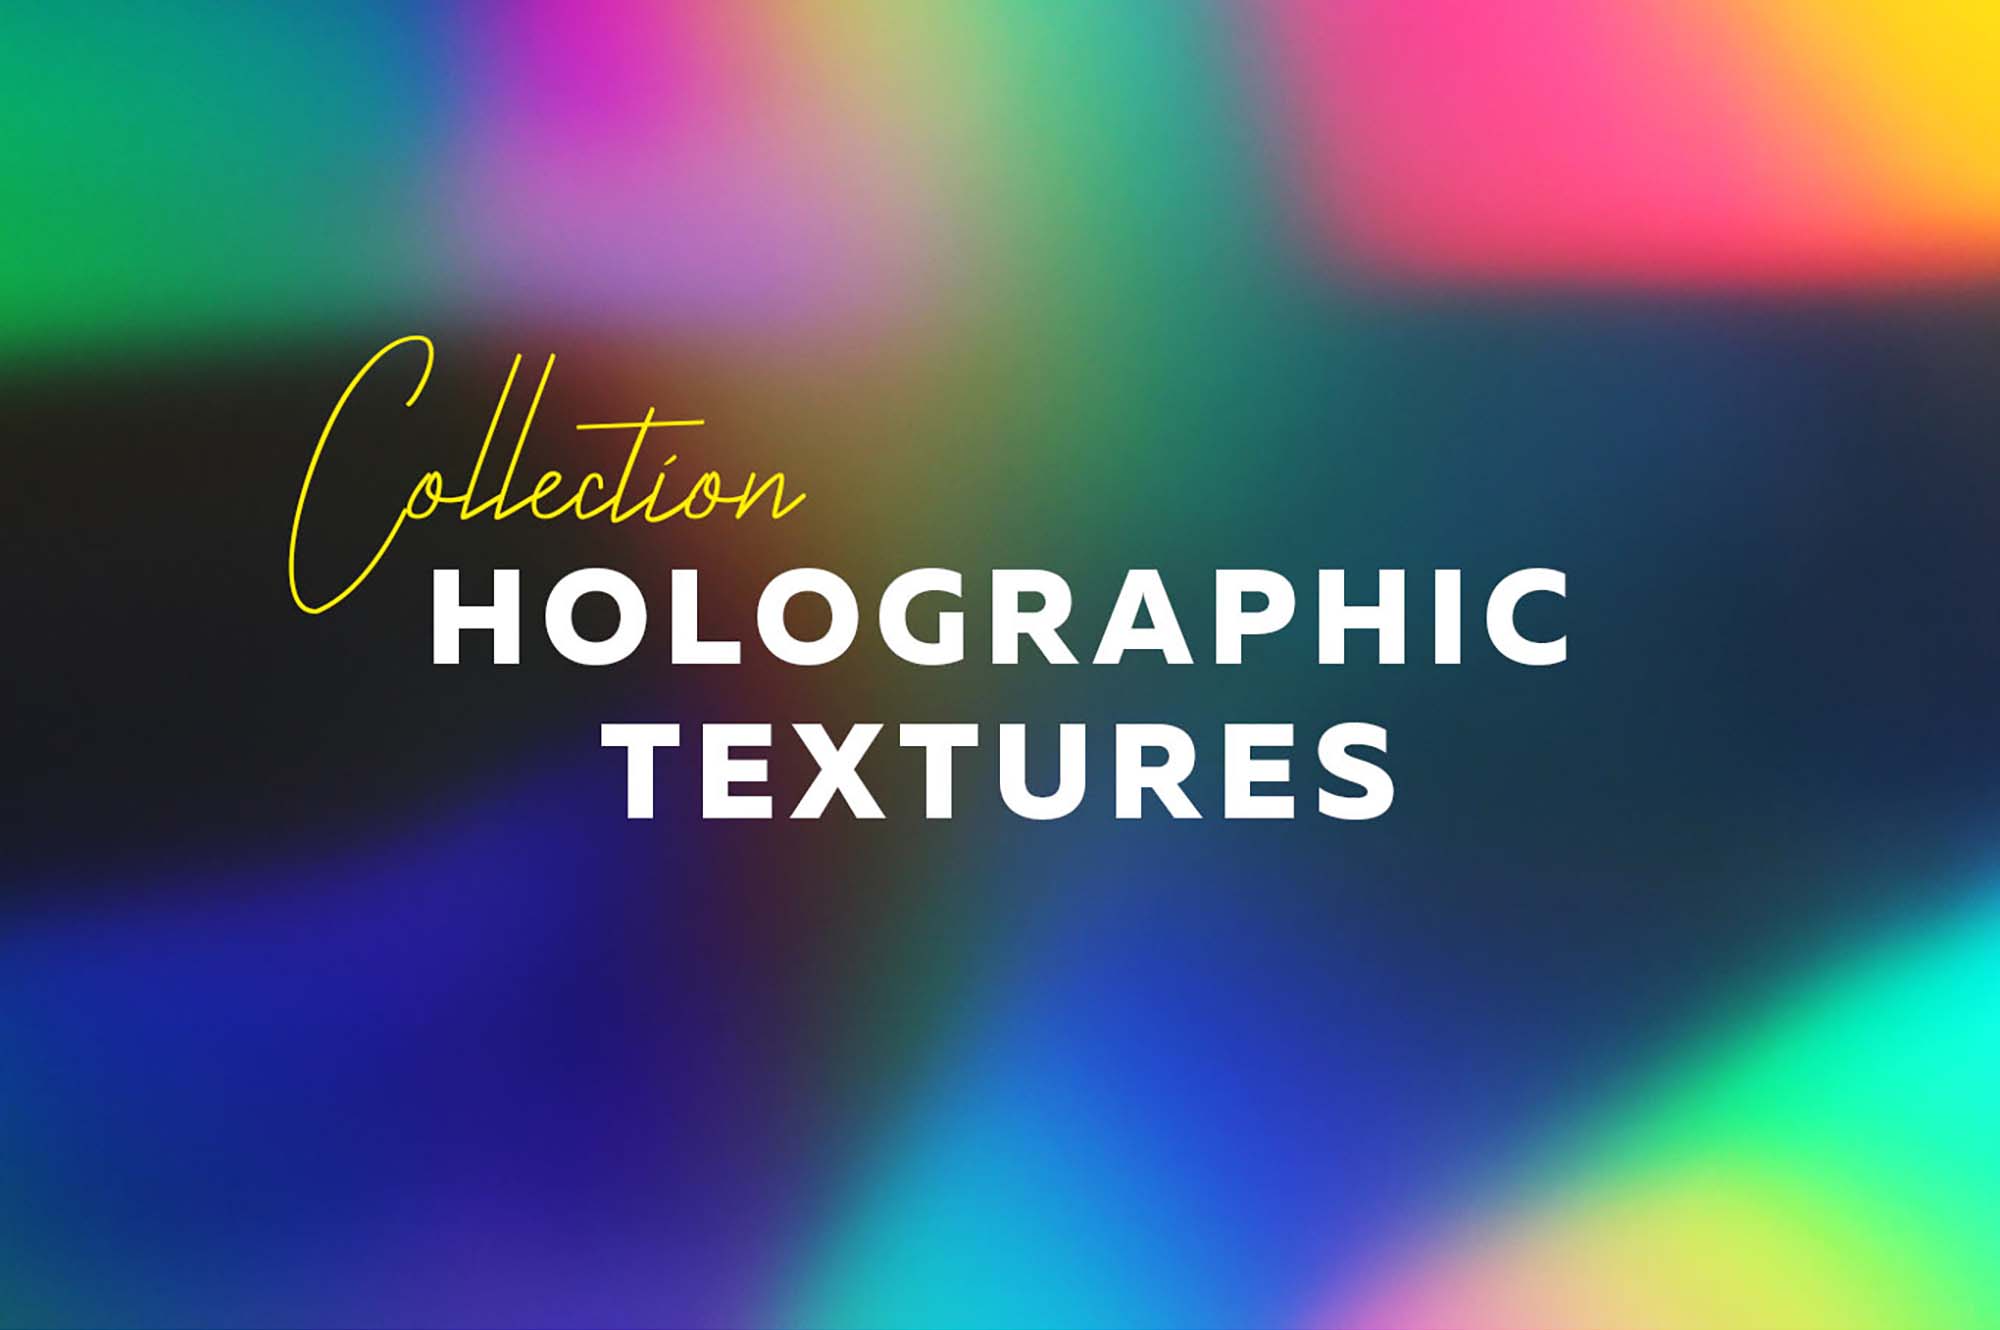 A collection of holographic rainbow textures